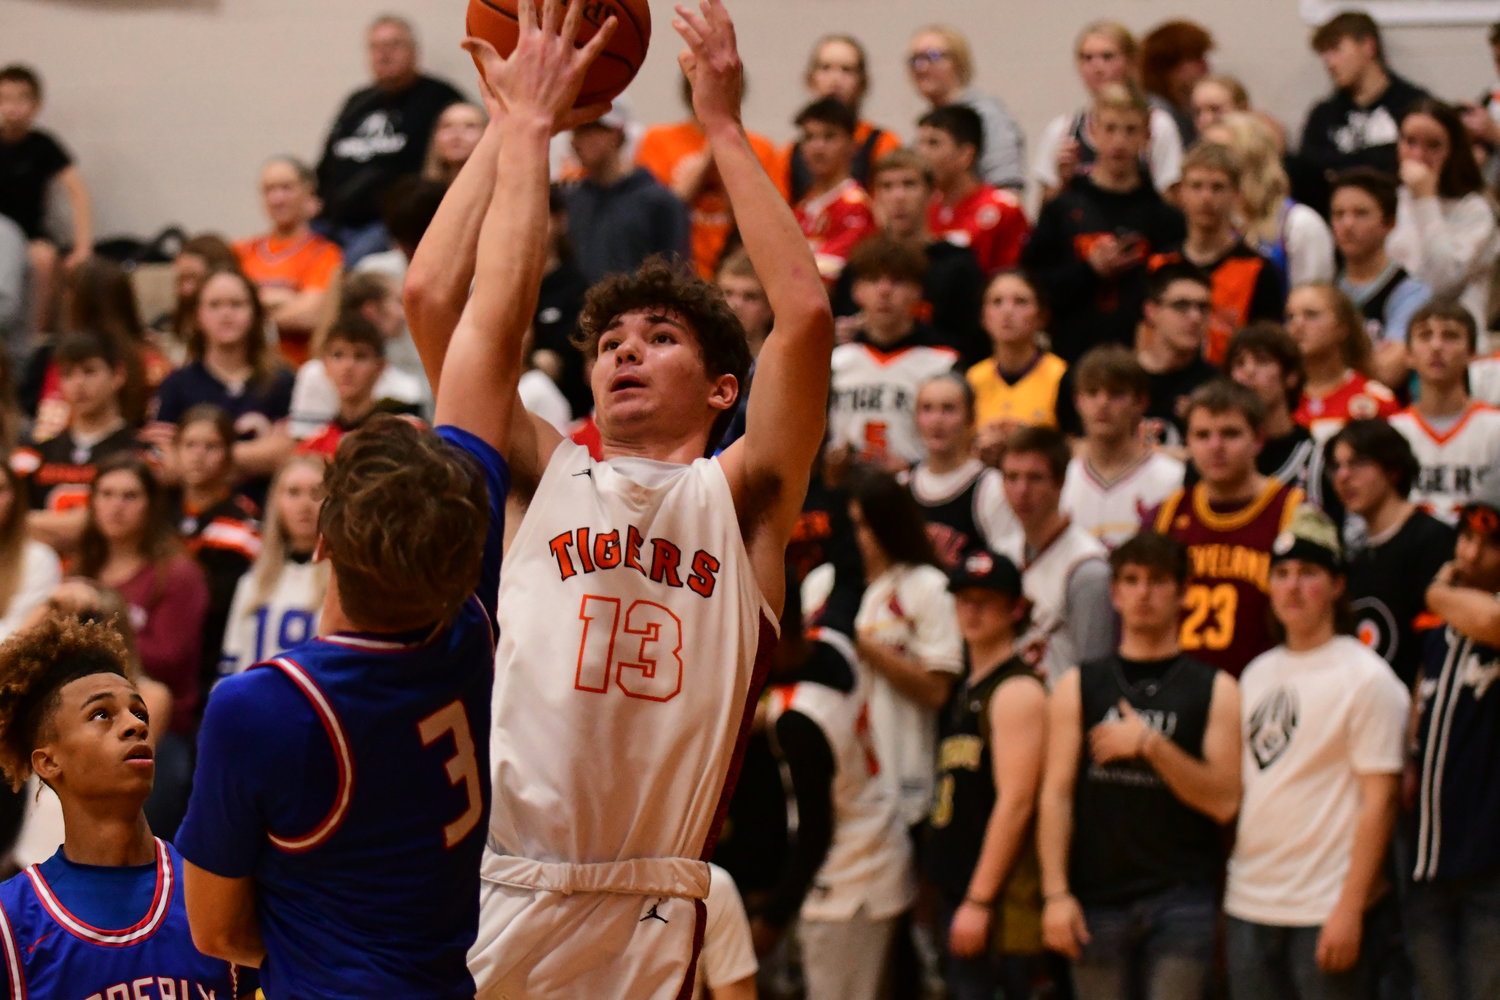 Kirksville junior Keaton Anderson puts up a shot Friday night against Moberly.